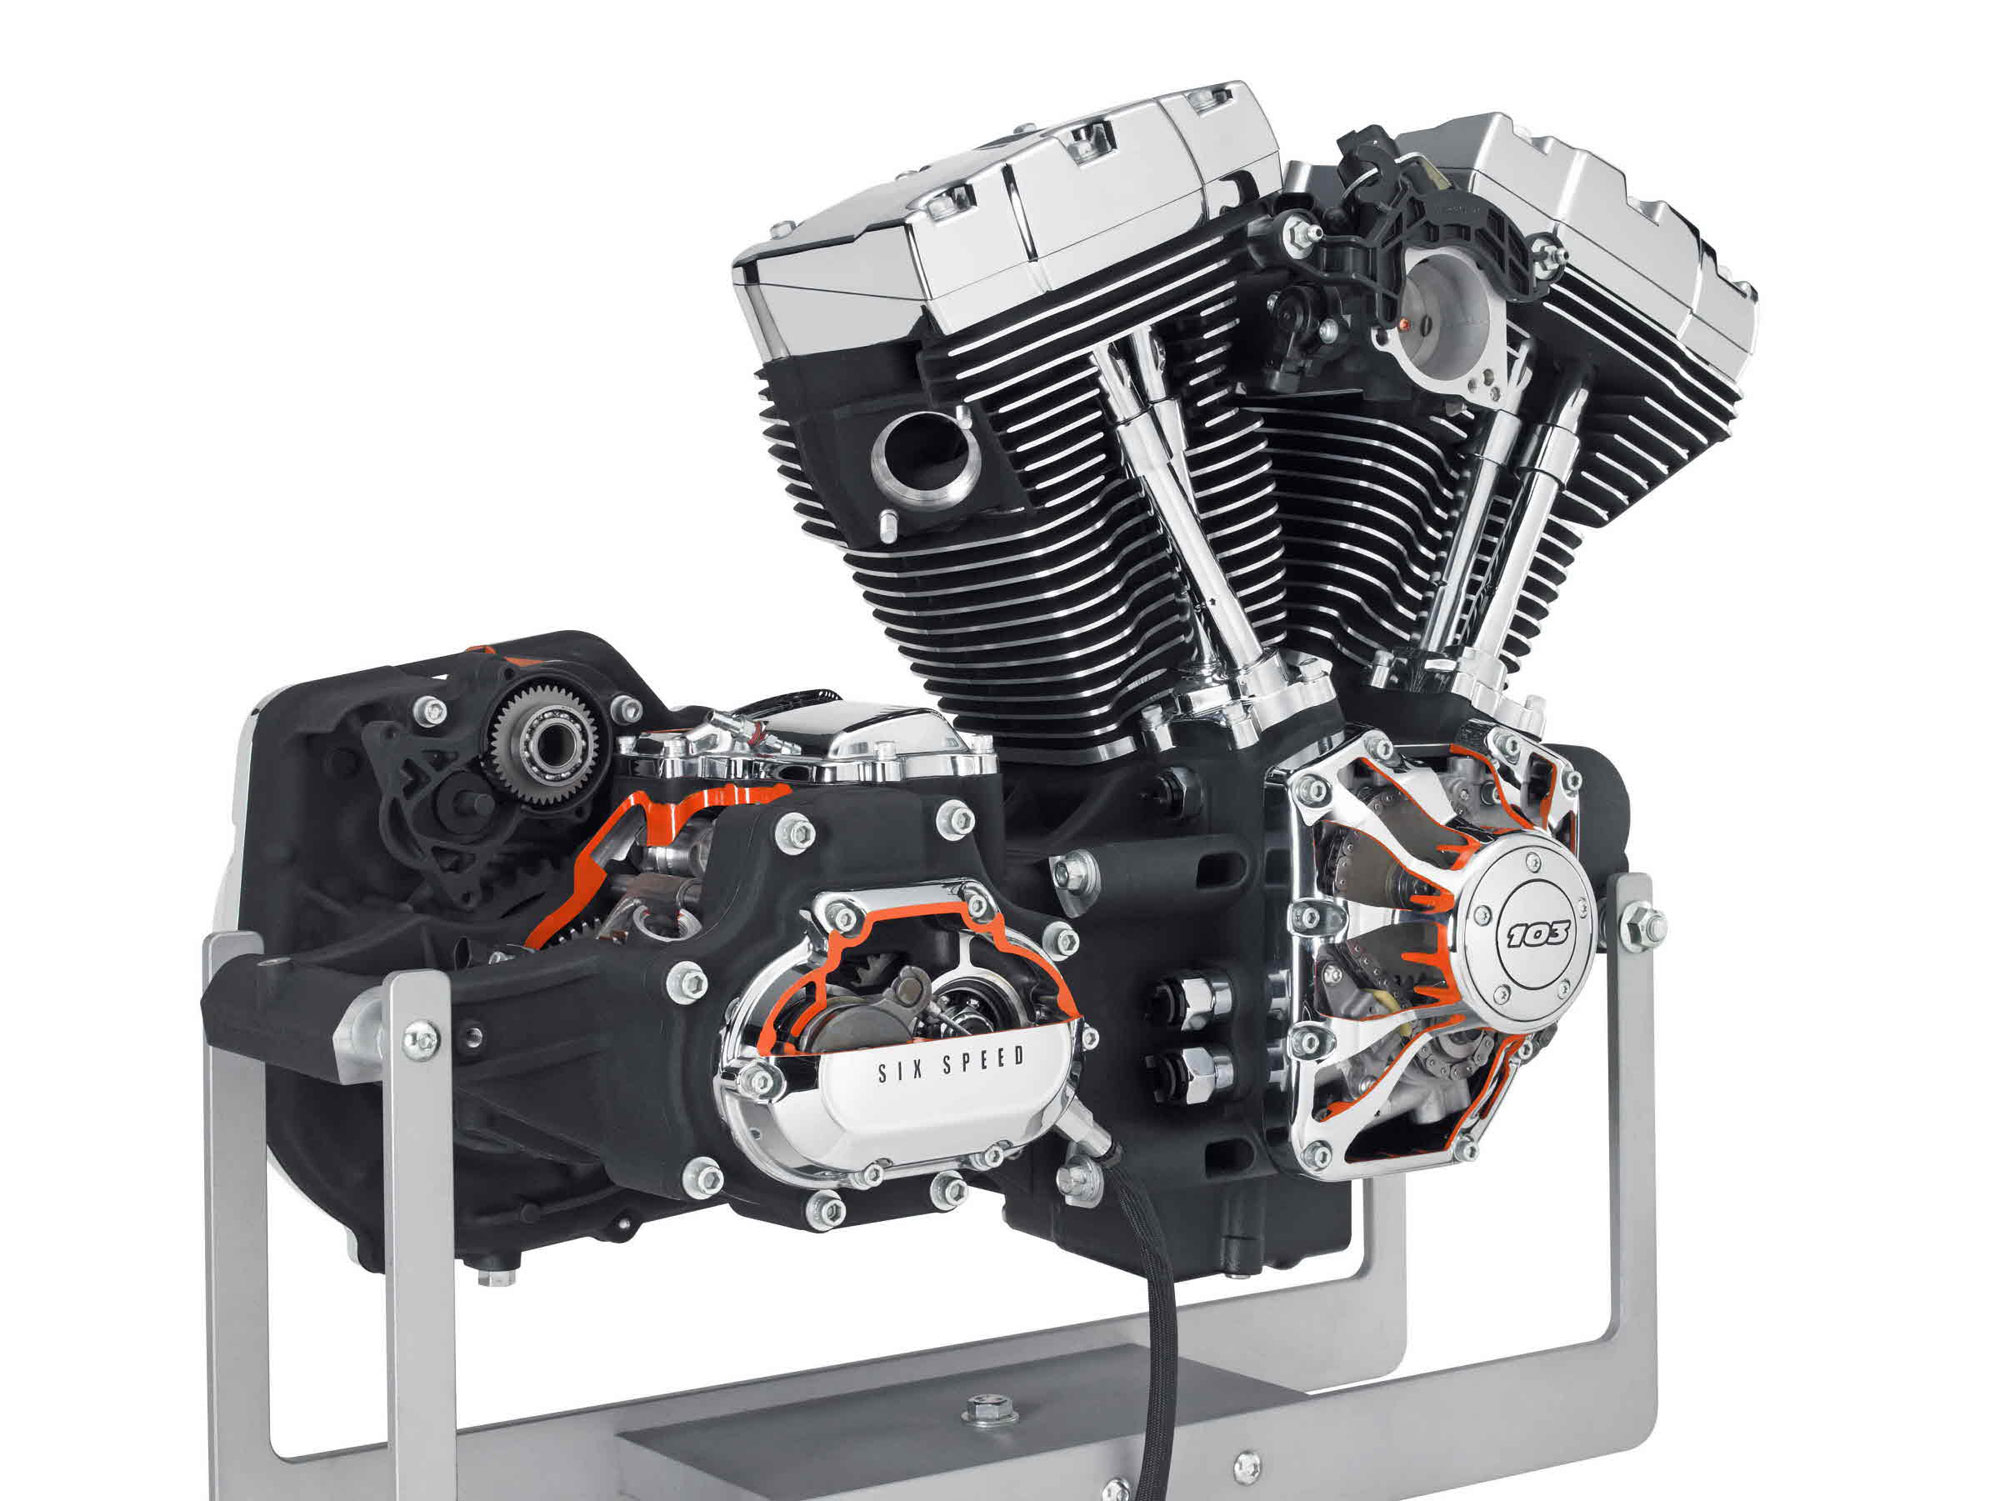 2018 Harley Davidson Milwaukee Eight 117 Engine Review Total Motorcycle